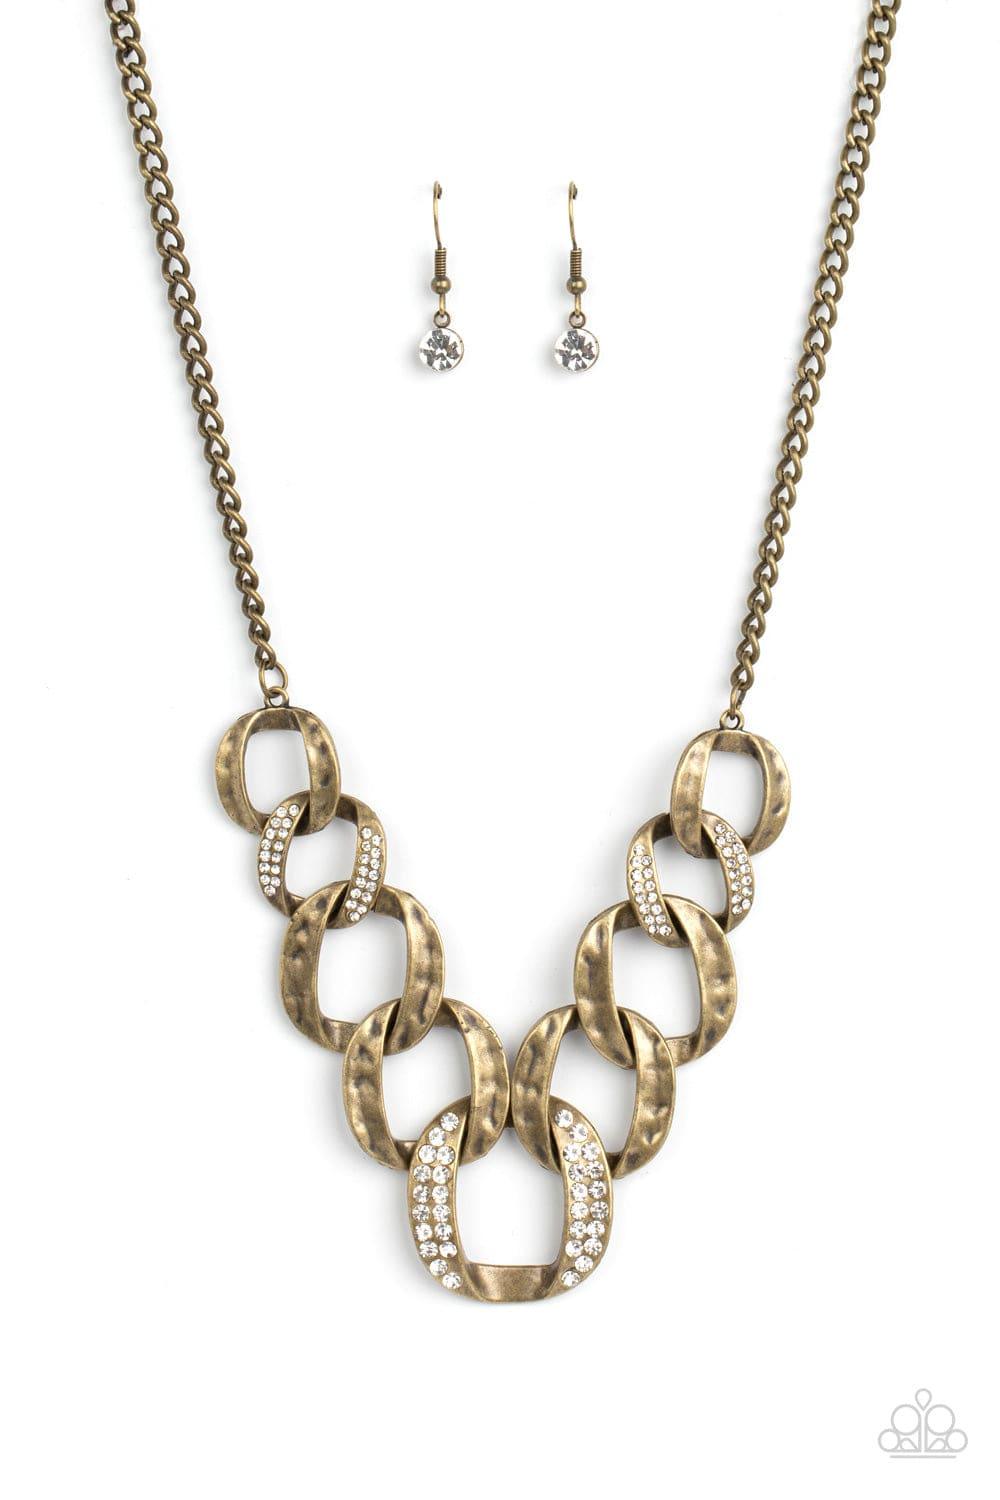 Paparazzi Accessories - Bombshell Bling - Brass Necklace - Bling by JessieK